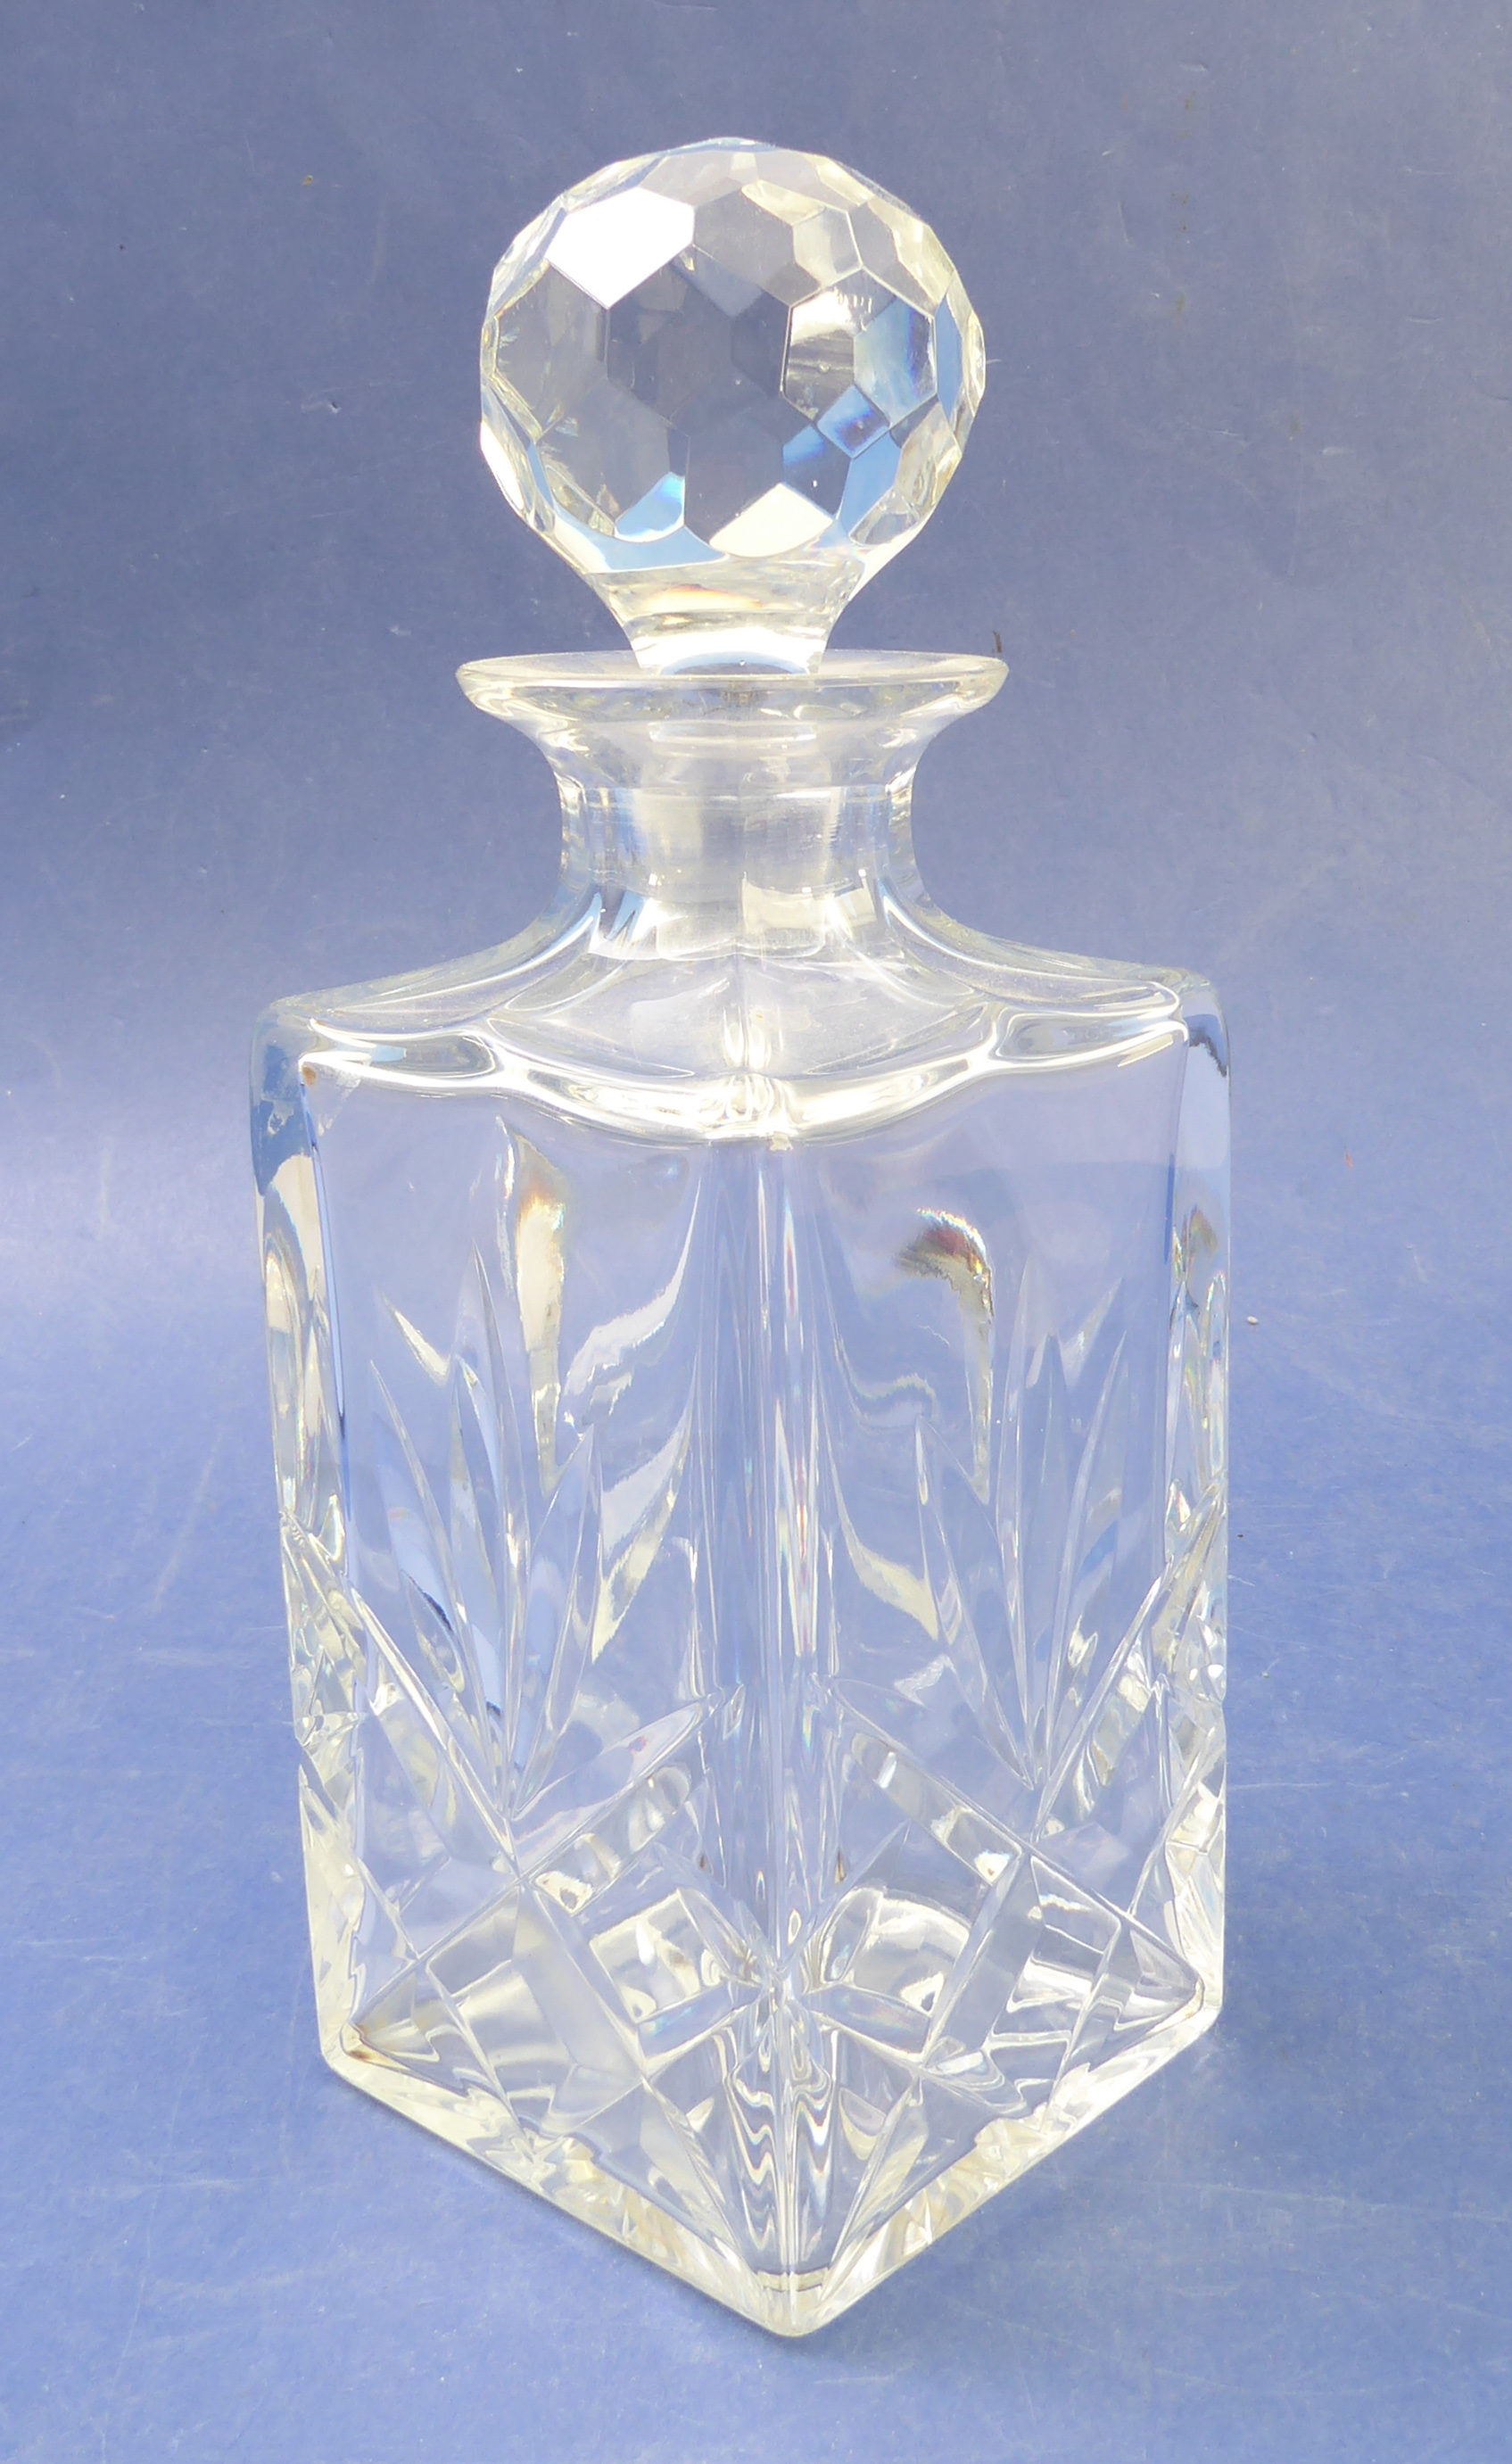 Fine quality glassware to include a hand-cut Spode decanter, a hand-cut mallet-shaped decanter, a - Image 5 of 8